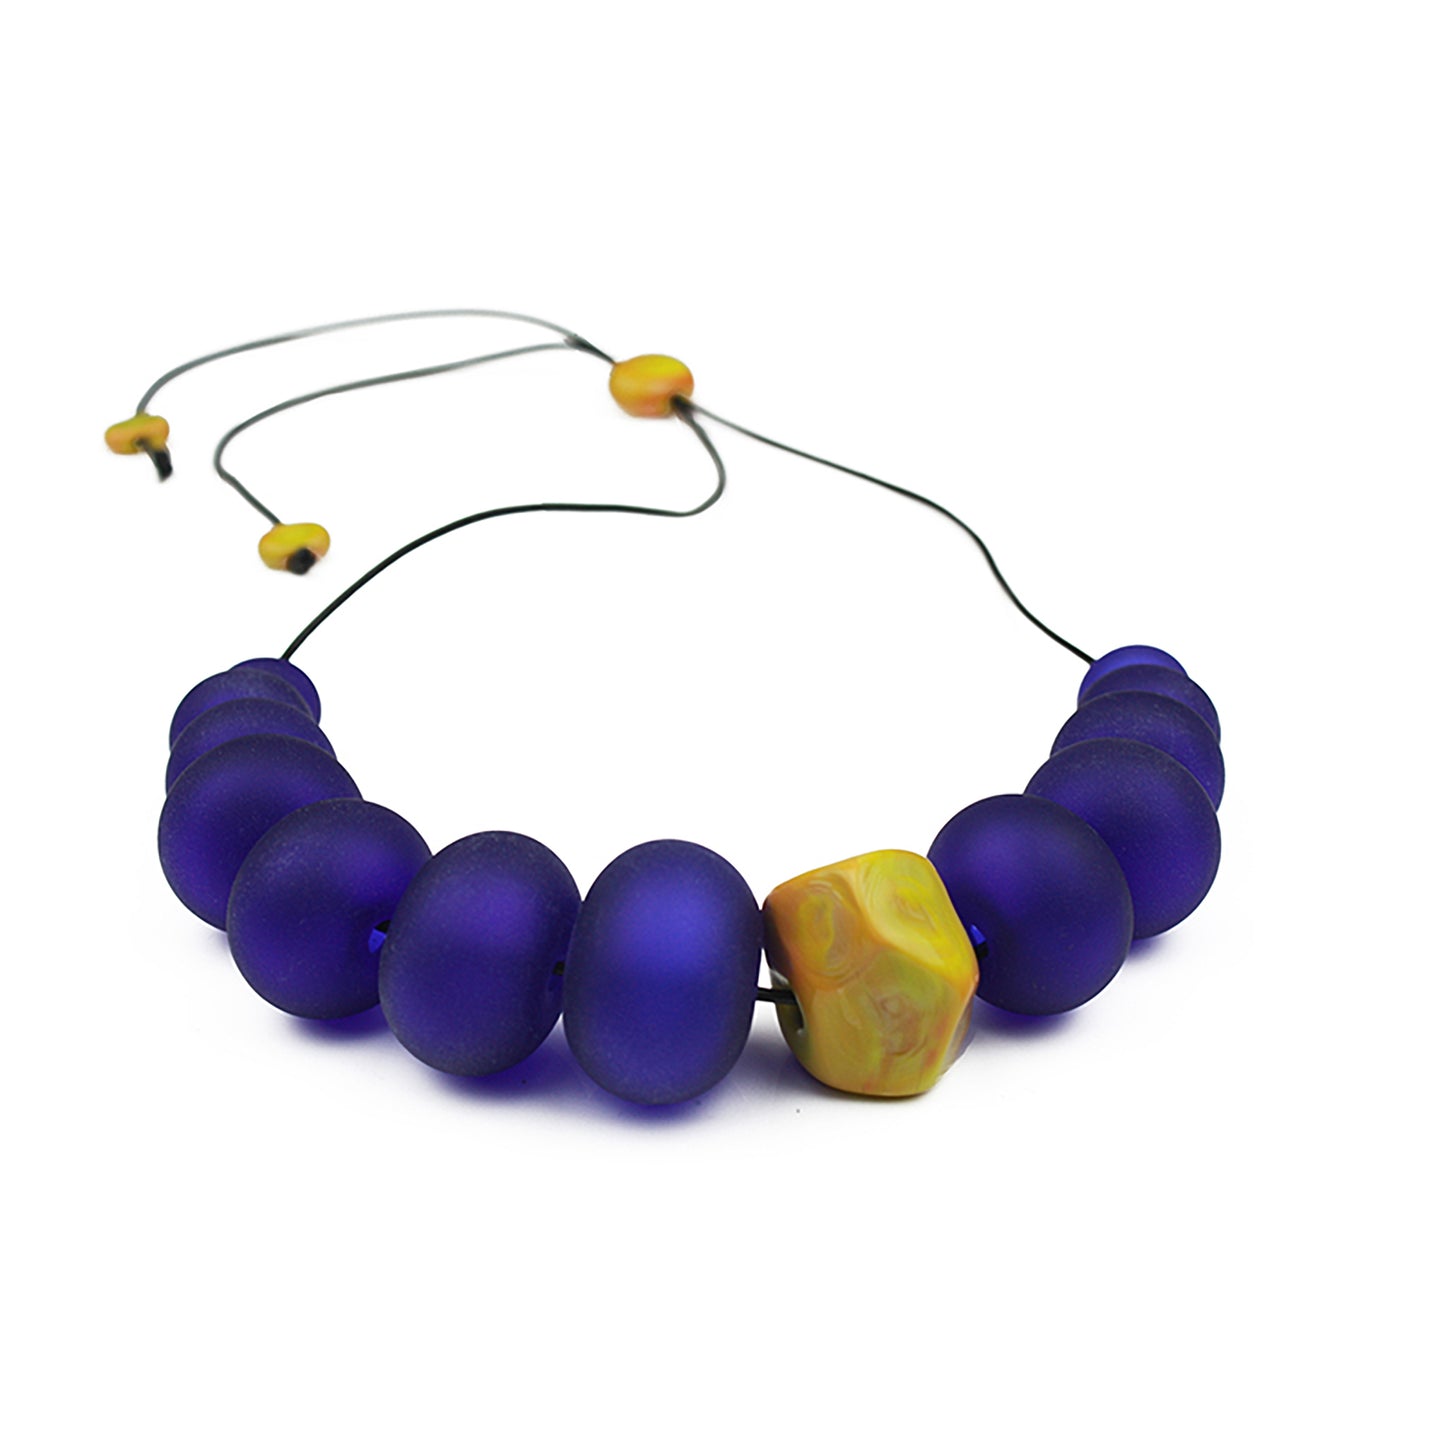 Bubble and nugget necklace - cobalt and ochre yellow